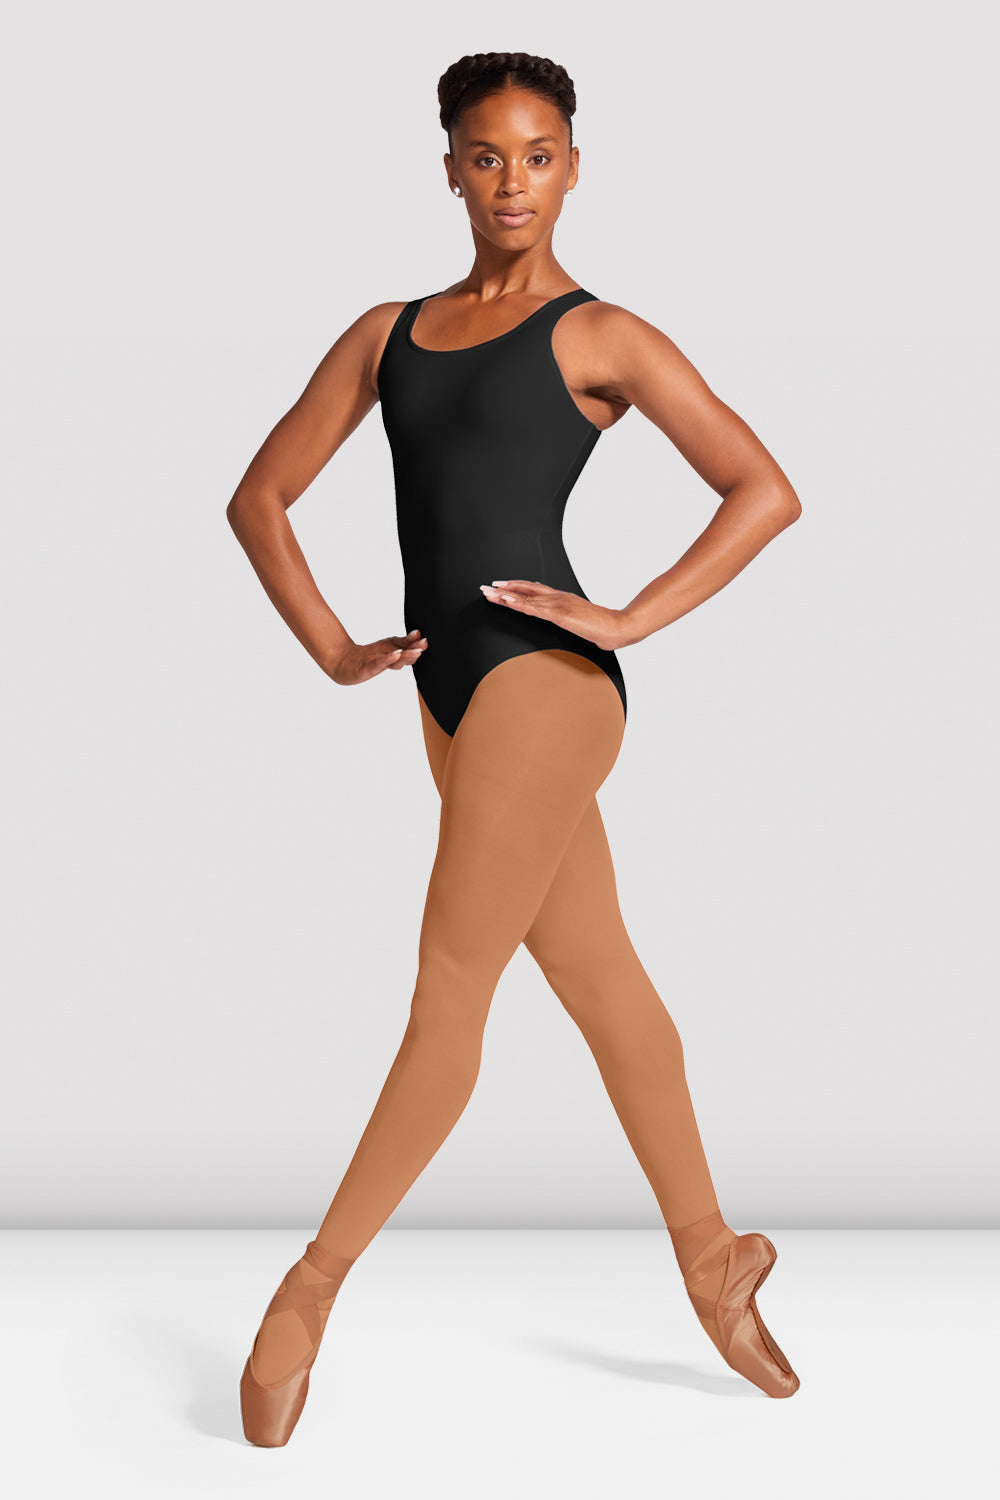 Bodysuits for Dance  Wide Range of Styles & Colors - All 4 Dance